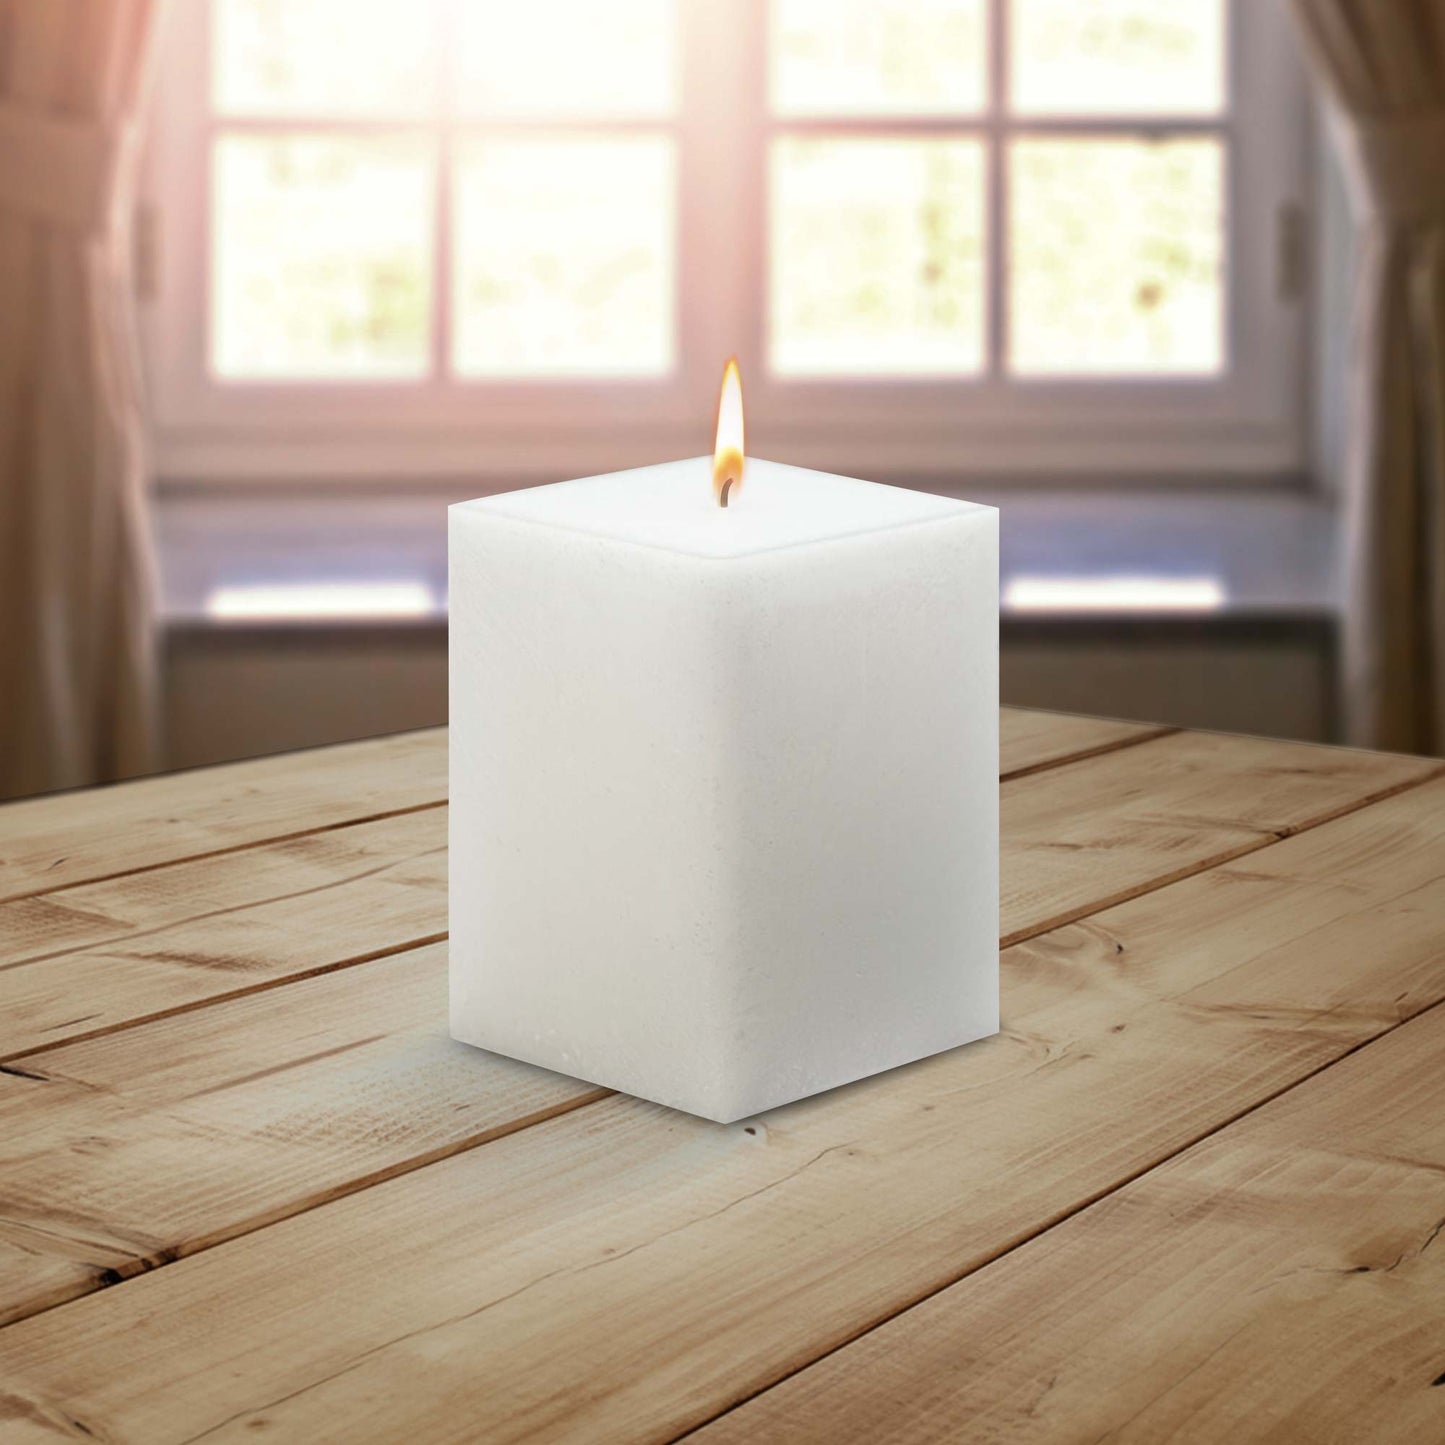 AuraDecor Bulk Buy Square 3*4*3 Inch Square Candle White Unscented ( Burning Time 45 Hours Each )